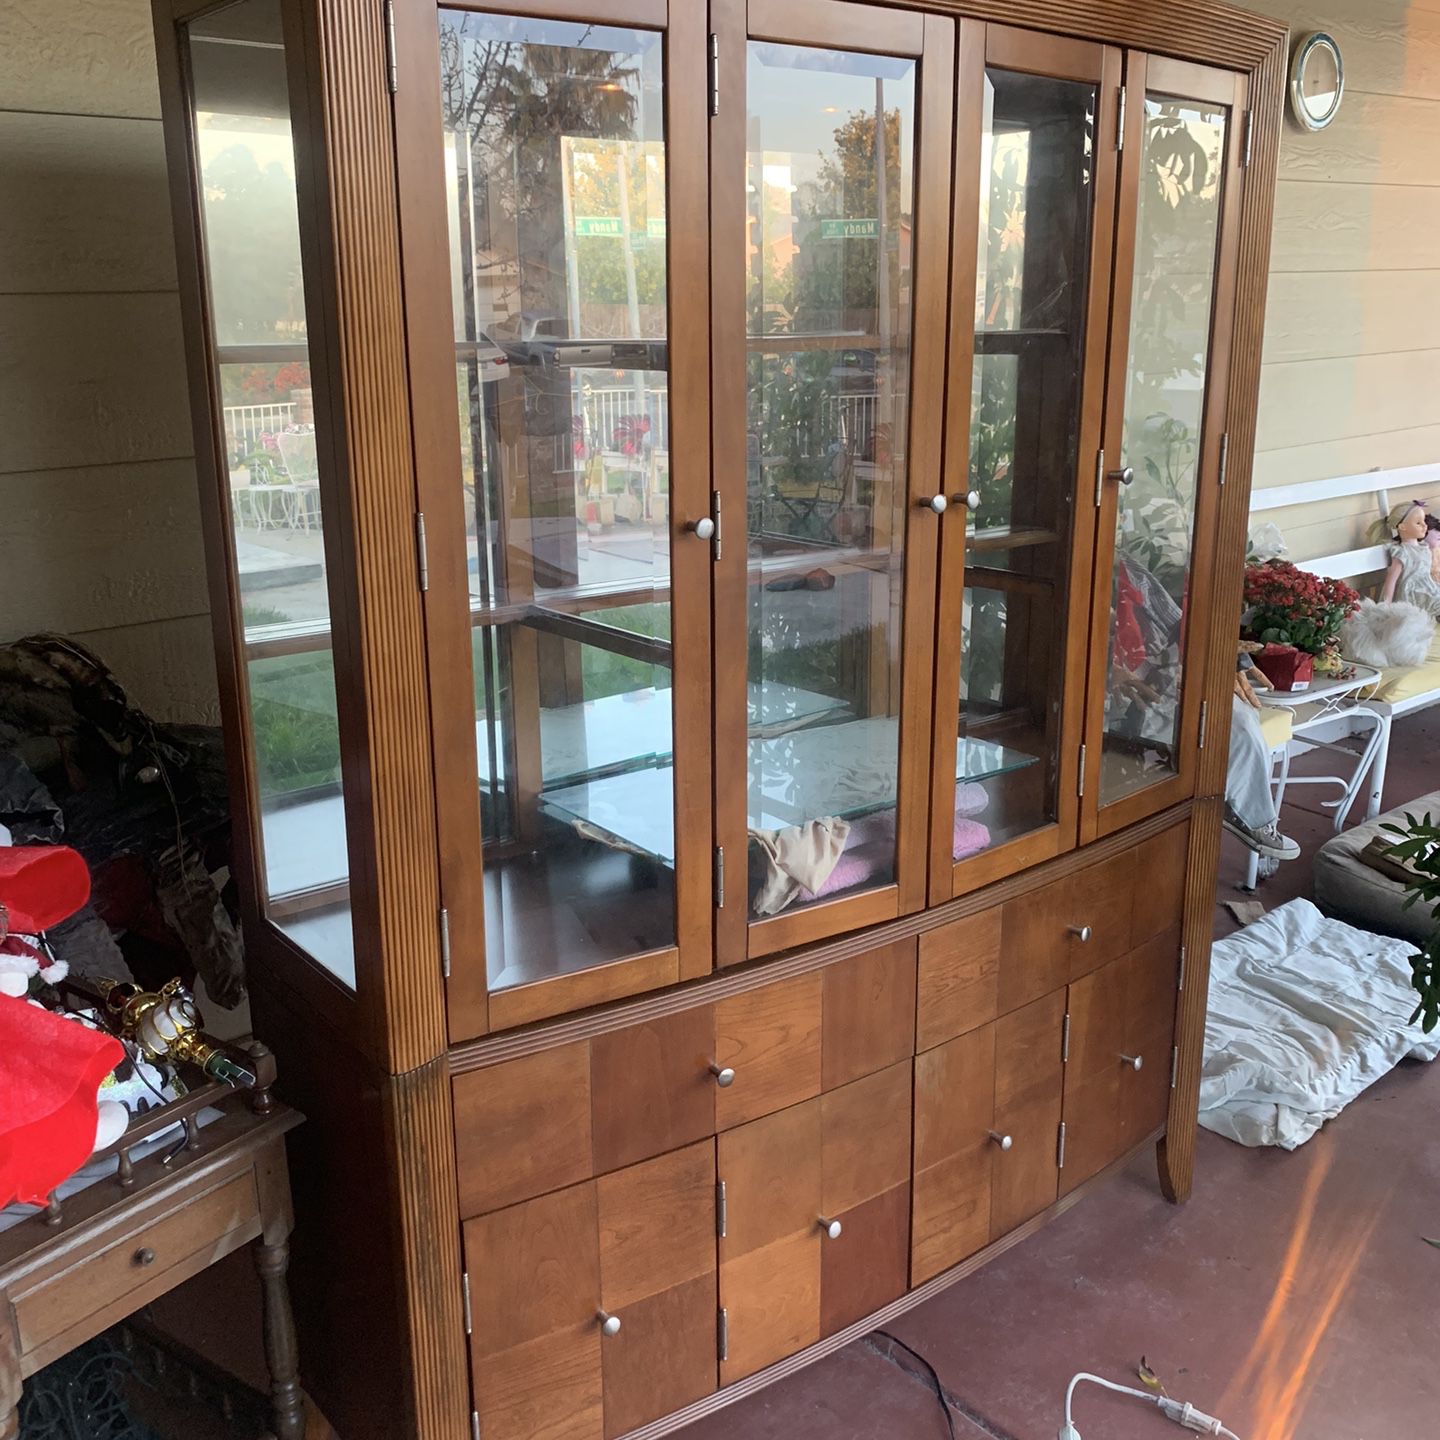 Big Brown Wooden China Cabinet with lights and mirror $250 Or Best Offer (o su mejor oferta. no tenga pena) . Make an offer pls don’t be shy I’m tryin